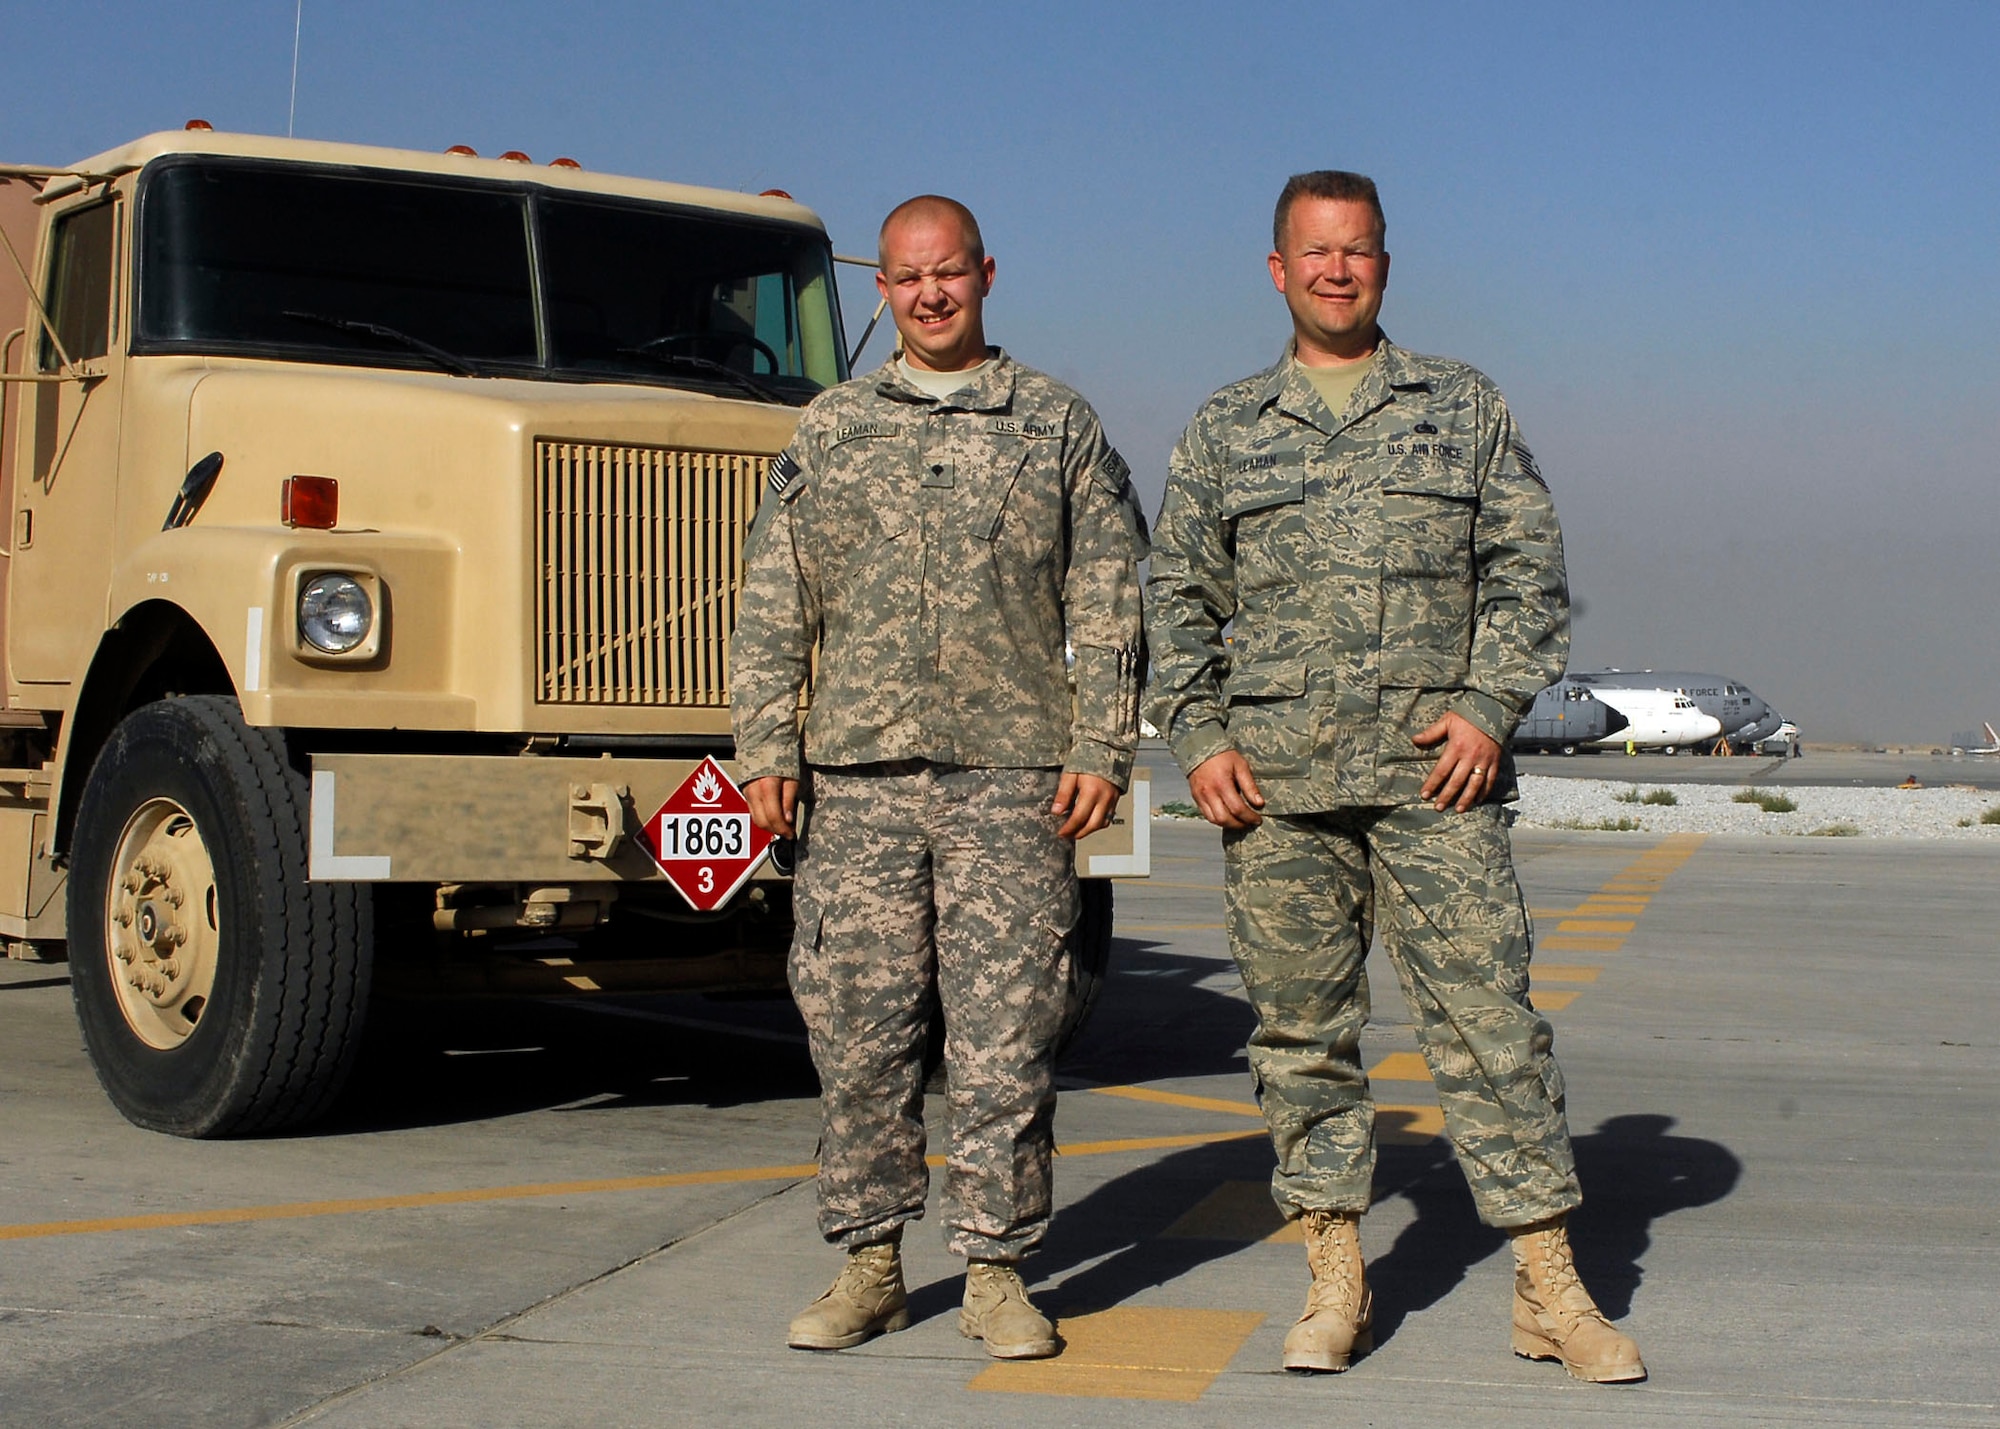 BAGRAM AIRFIELD, Afghanistan -- Army Spc. Kevin Leaman (left), a vehicle maintainer with the Fourth Infantry Division, poses for a photo with his dad, Tech. Sgt. Thomas Leaman (right), the fuels mobility support equipment shop non-commissioned officer in charge of the 455th Expeditionary Logistics Readiness Squadron.  Sergeant Leaman is an Air Force Reservist deployed from the 302nd Airlift Wing at Peterson Air Force Base, Colo.  Specialist Leaman is deployed from Fort Carson, Colo.  (U.S. Air Force photo/Senior Airman Felicia Juenke)